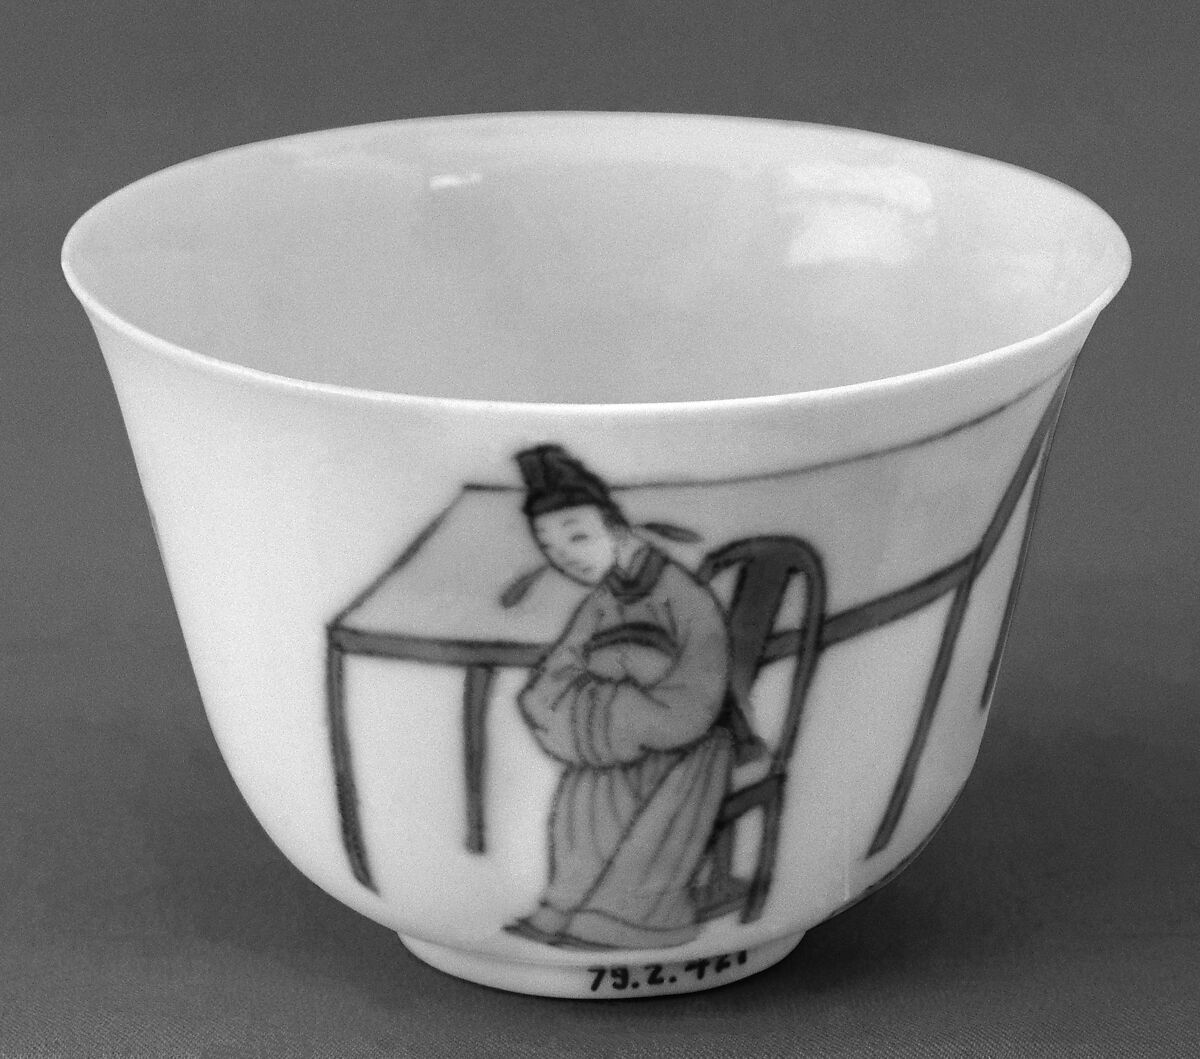 Cup with a scholar and monk, Porcelain painted in underglaze cobalt blue (Jingdezhen ware), China 